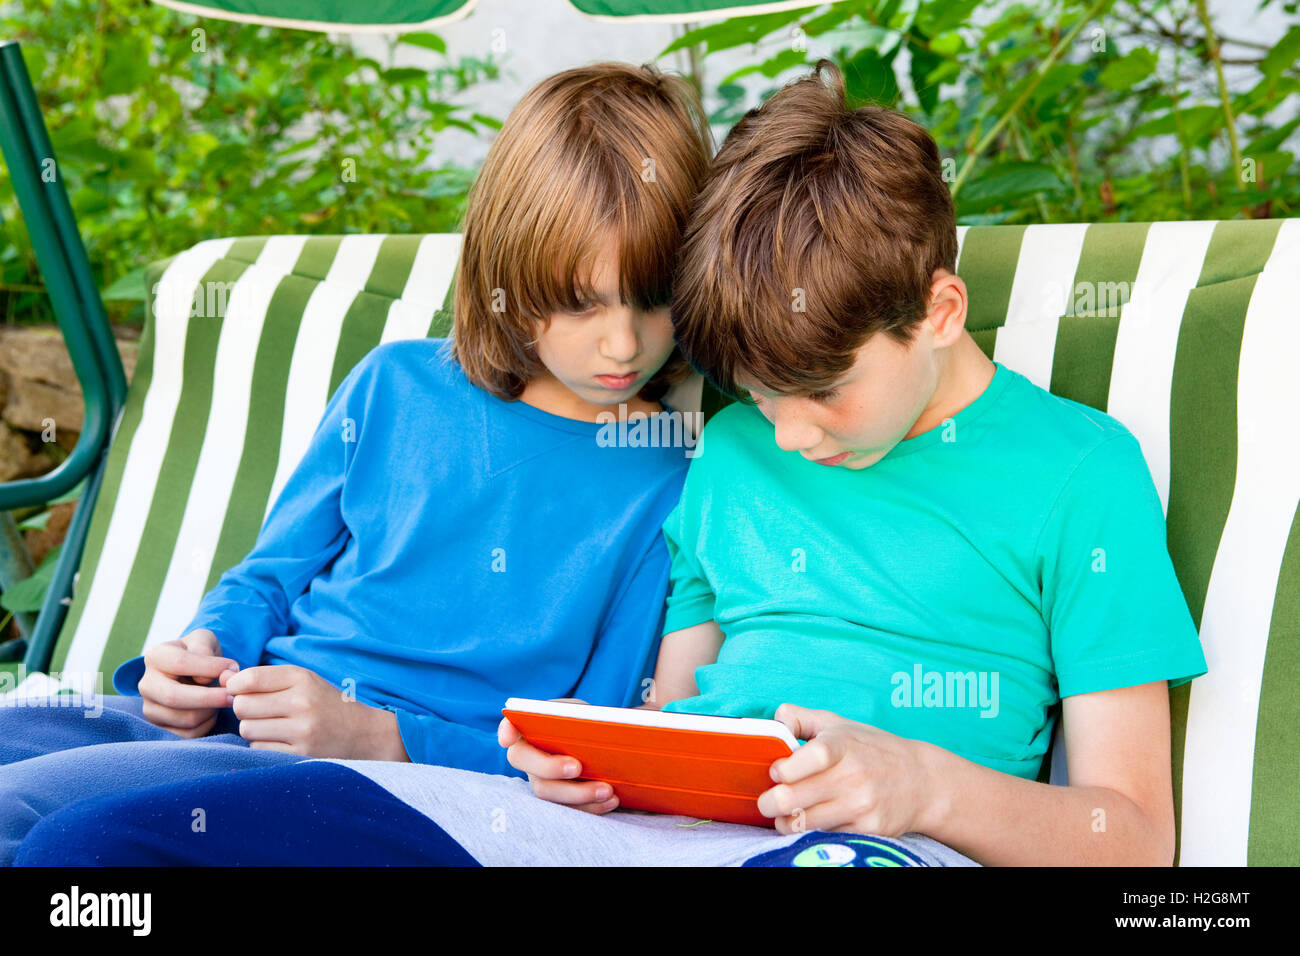 Two Boys Sitting in the Garden Playing with Tablet Stock Photo